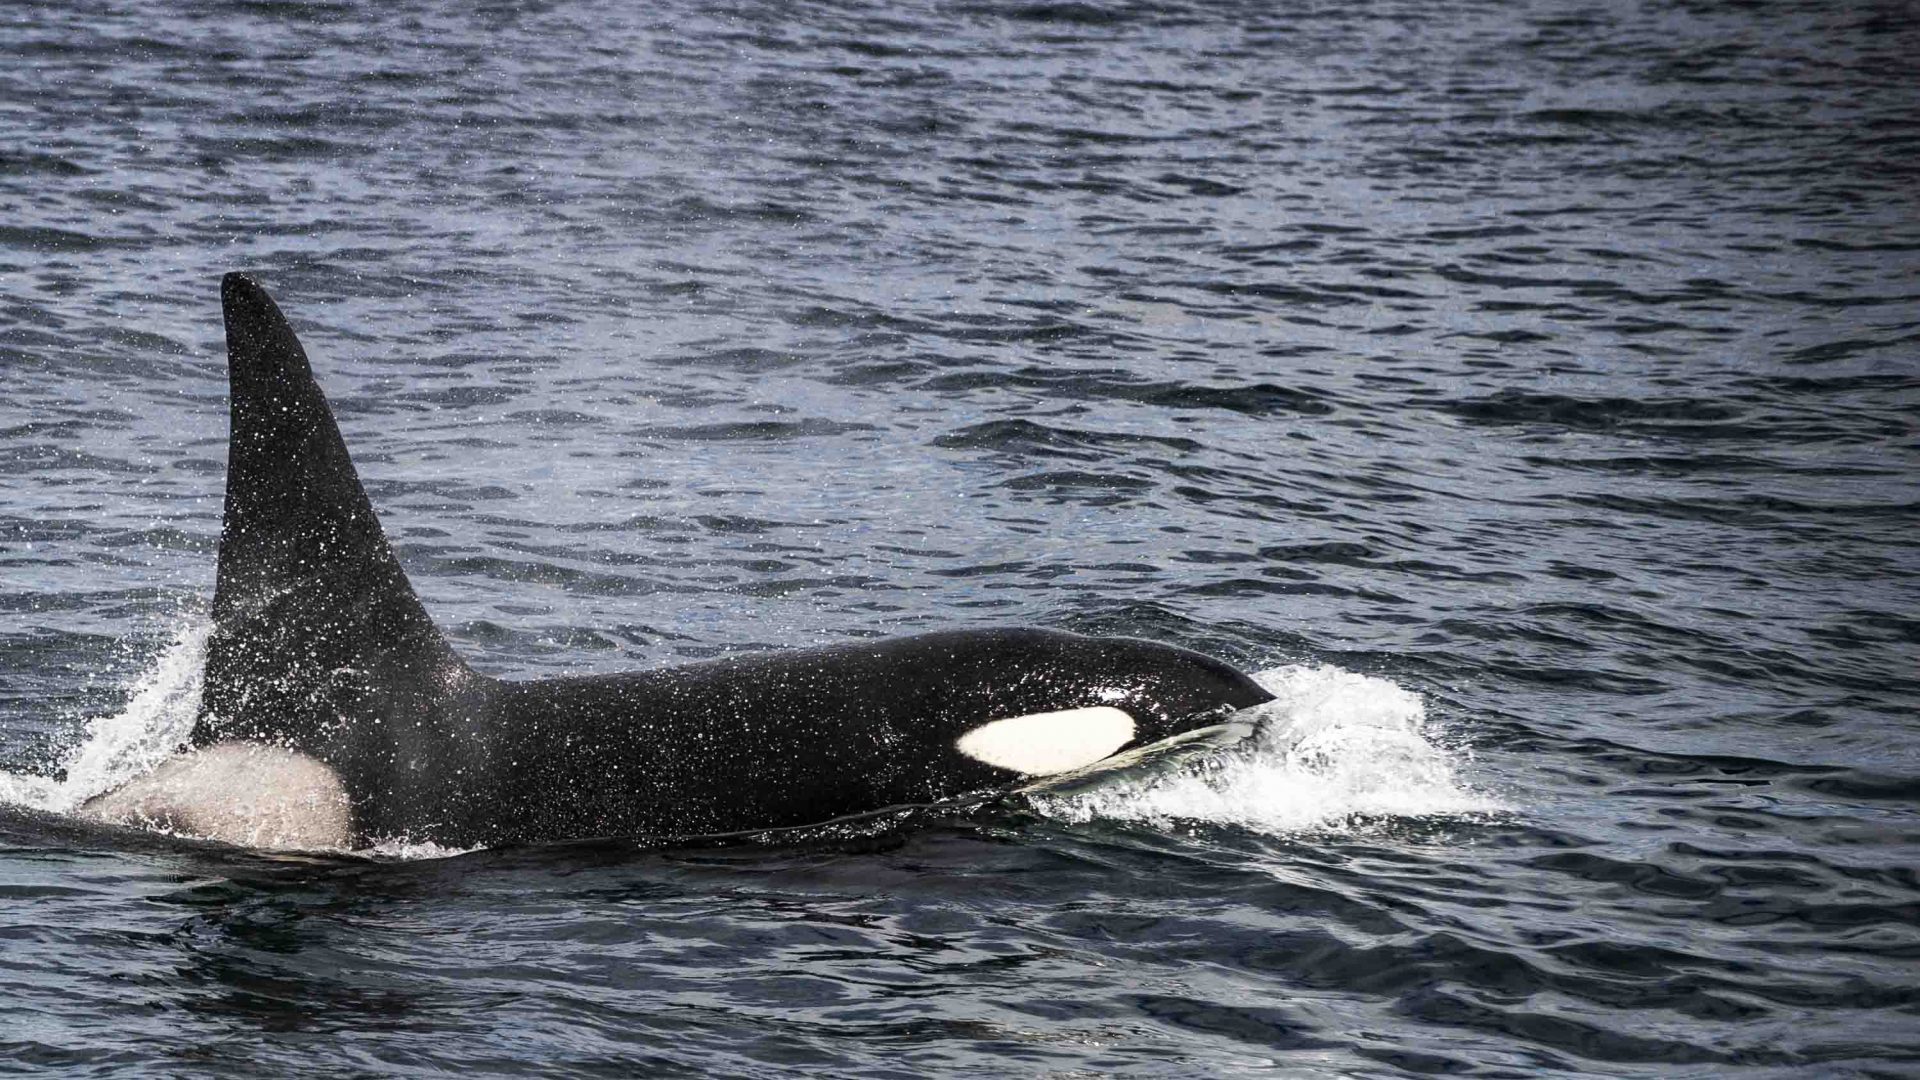 An Orca in the sea.